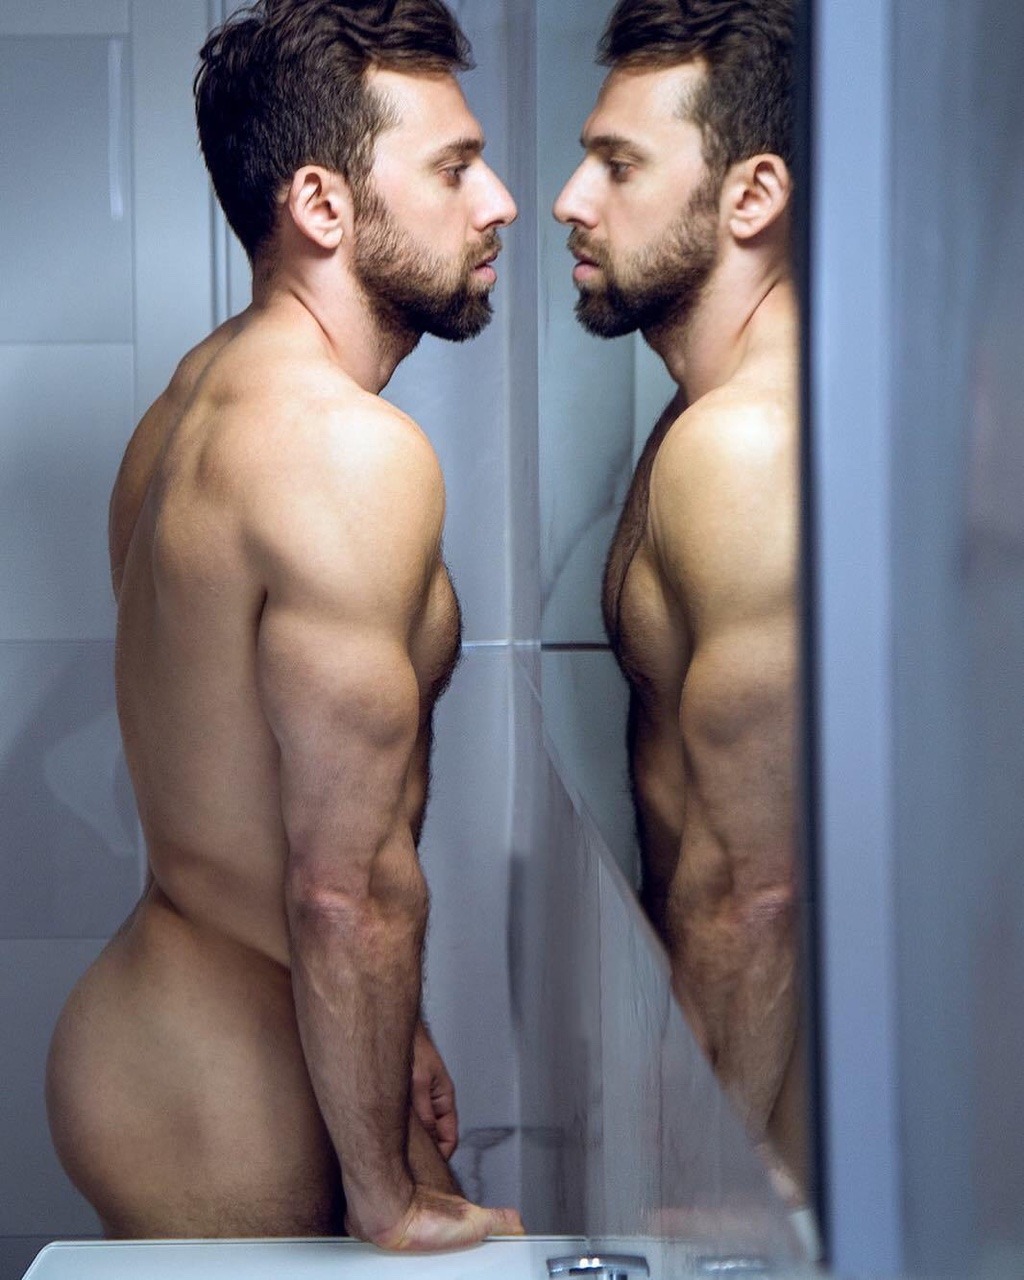 ghostinthedude: “I want to look like Liam.” I say plainly, gazing into my reflection